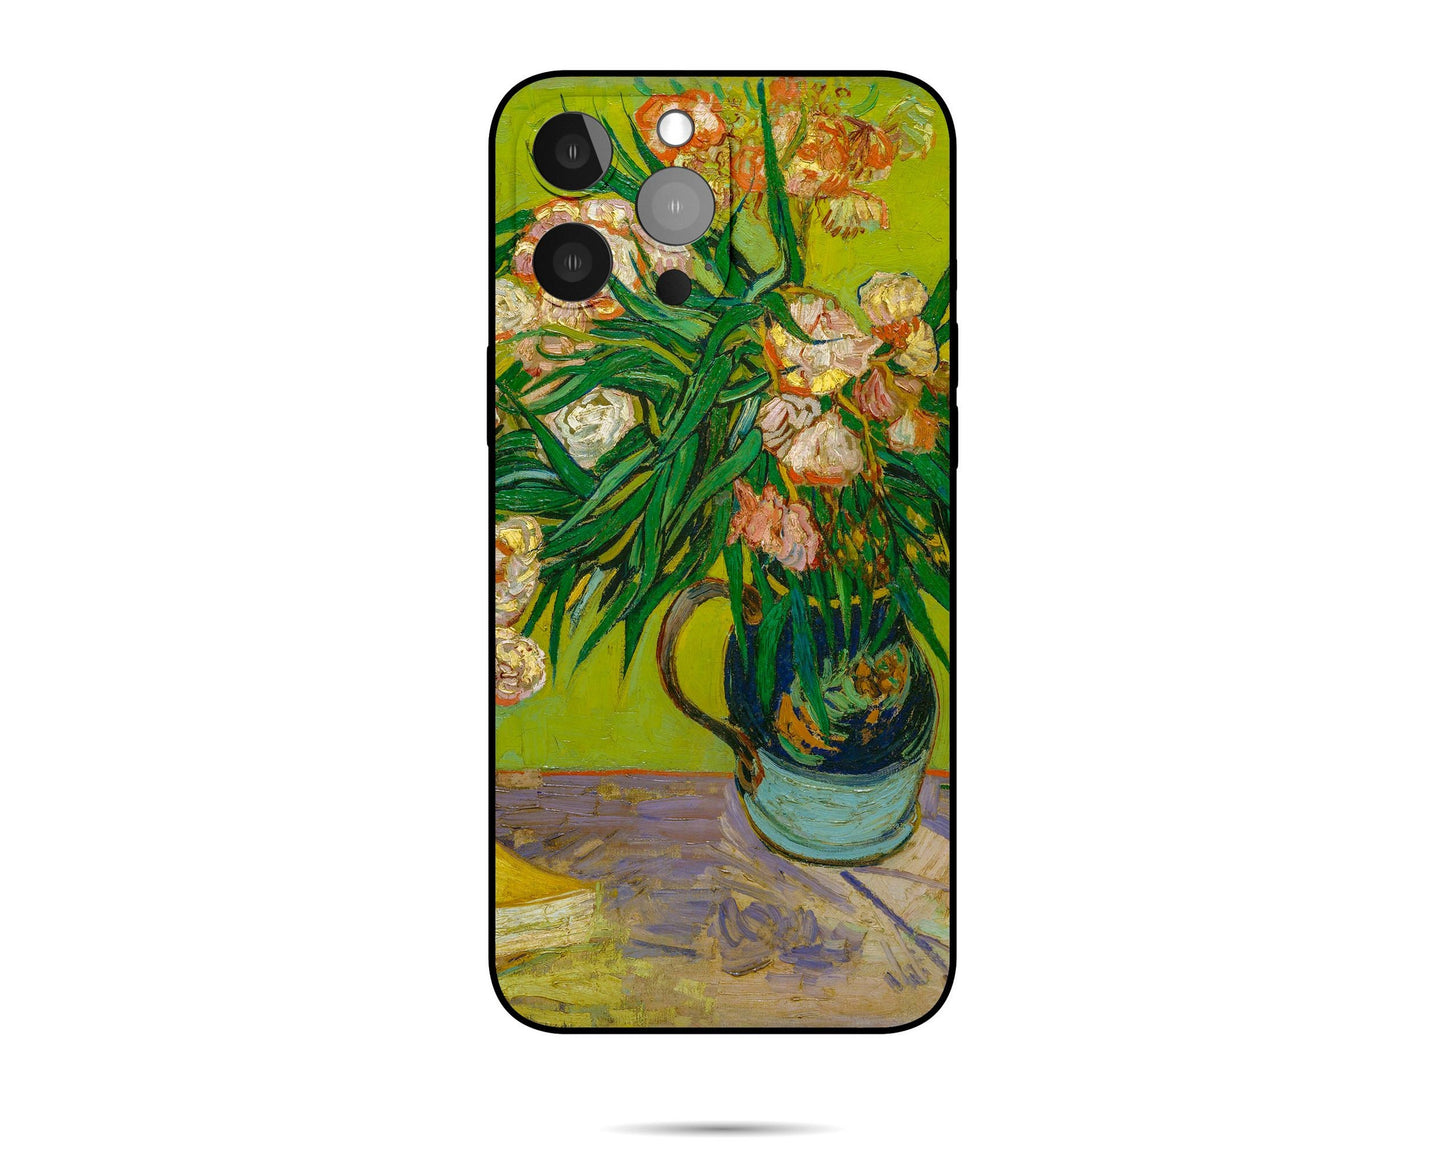 Iphone 14 Case Of Vincent Van Gogh Painting Oleanders, Iphone 11 Case, Iphone Xs Case, Designer Iphone 8 Plus Case, Iphone Case Protective